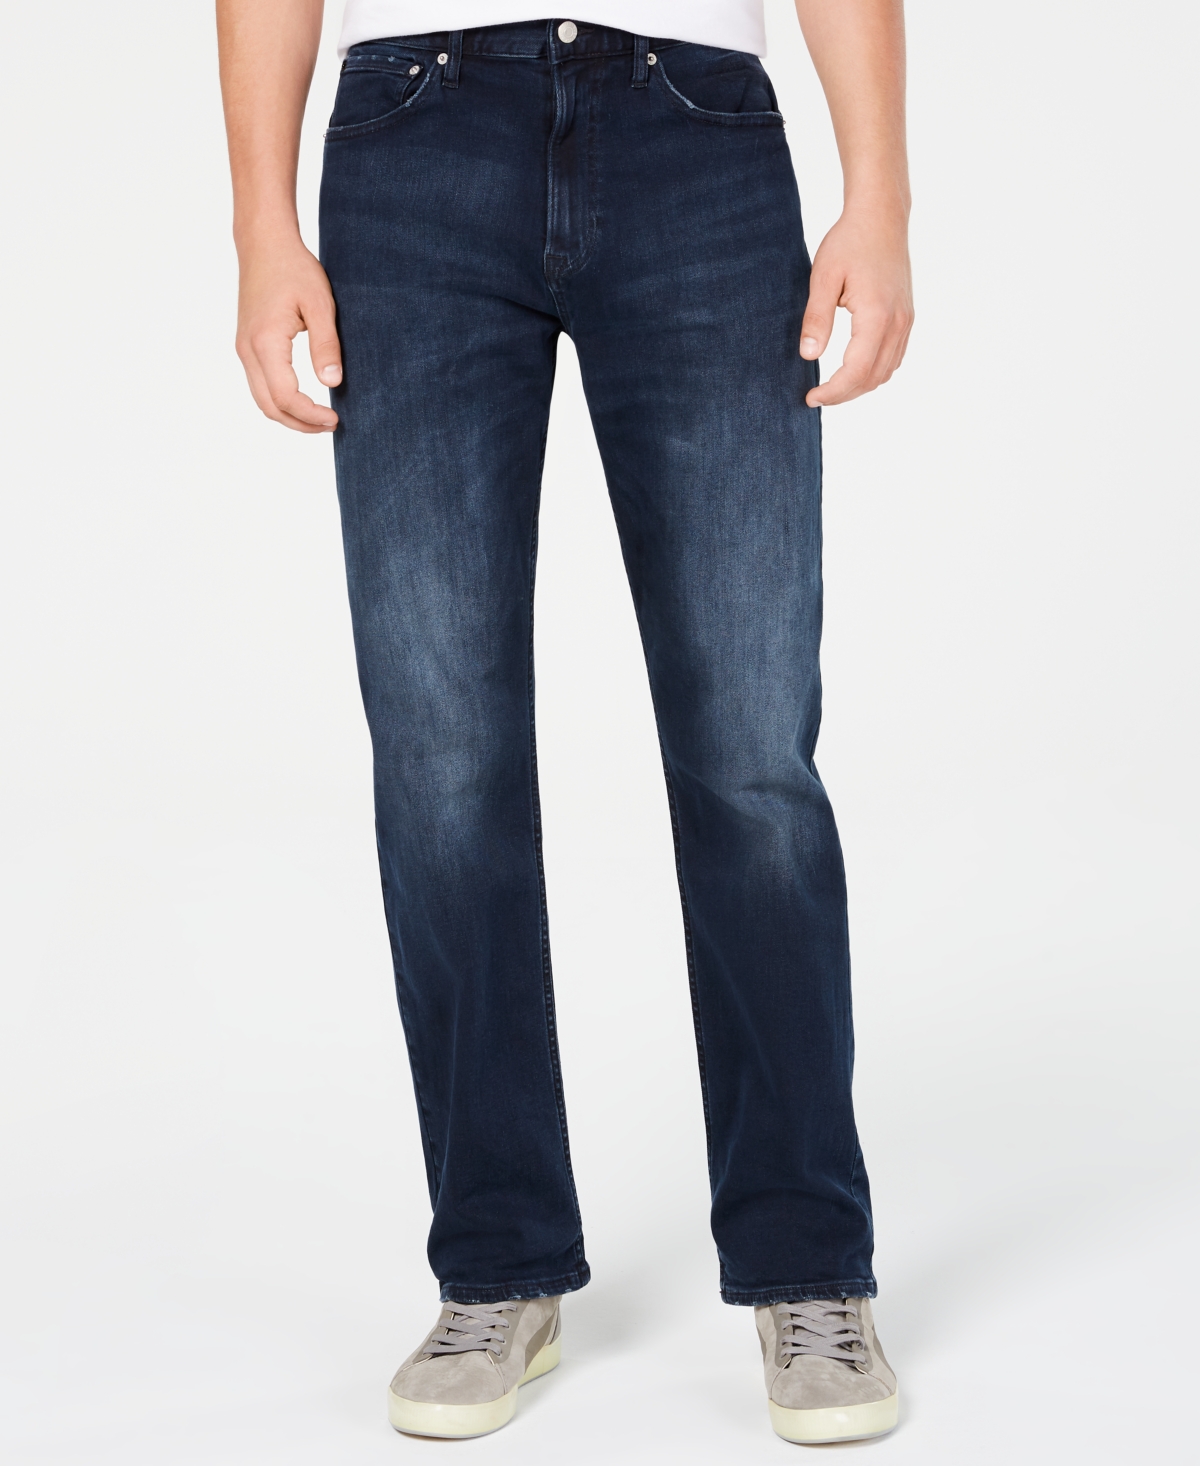 UPC 013283515451 product image for Calvin Klein Men's Straight-Fit Stretch Jeans | upcitemdb.com